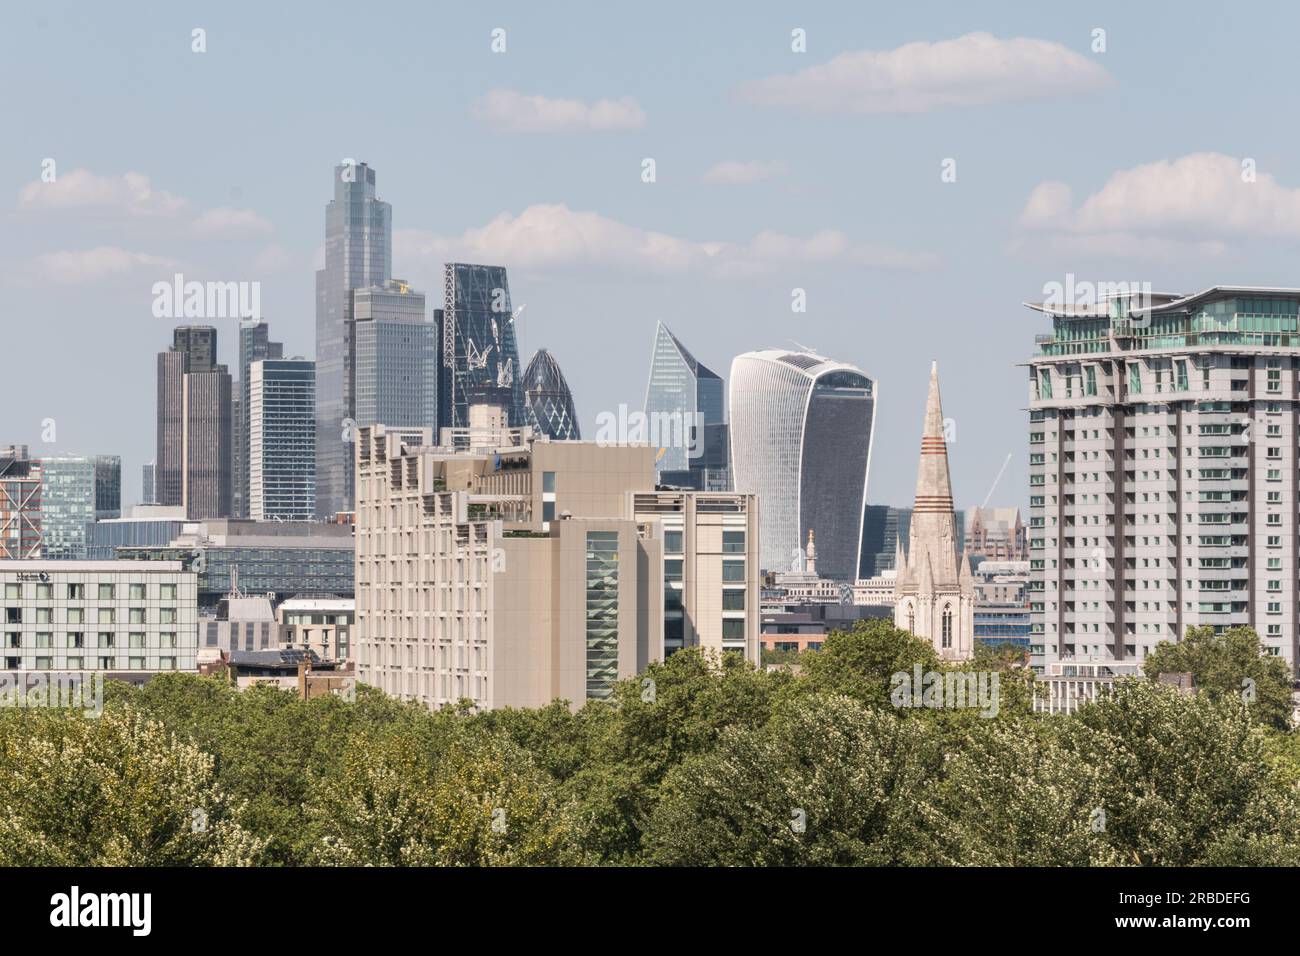 City of London skyscrapers as seen from Lambeth Palace on the banks of the River Thames, London, England, UK Stock Photo